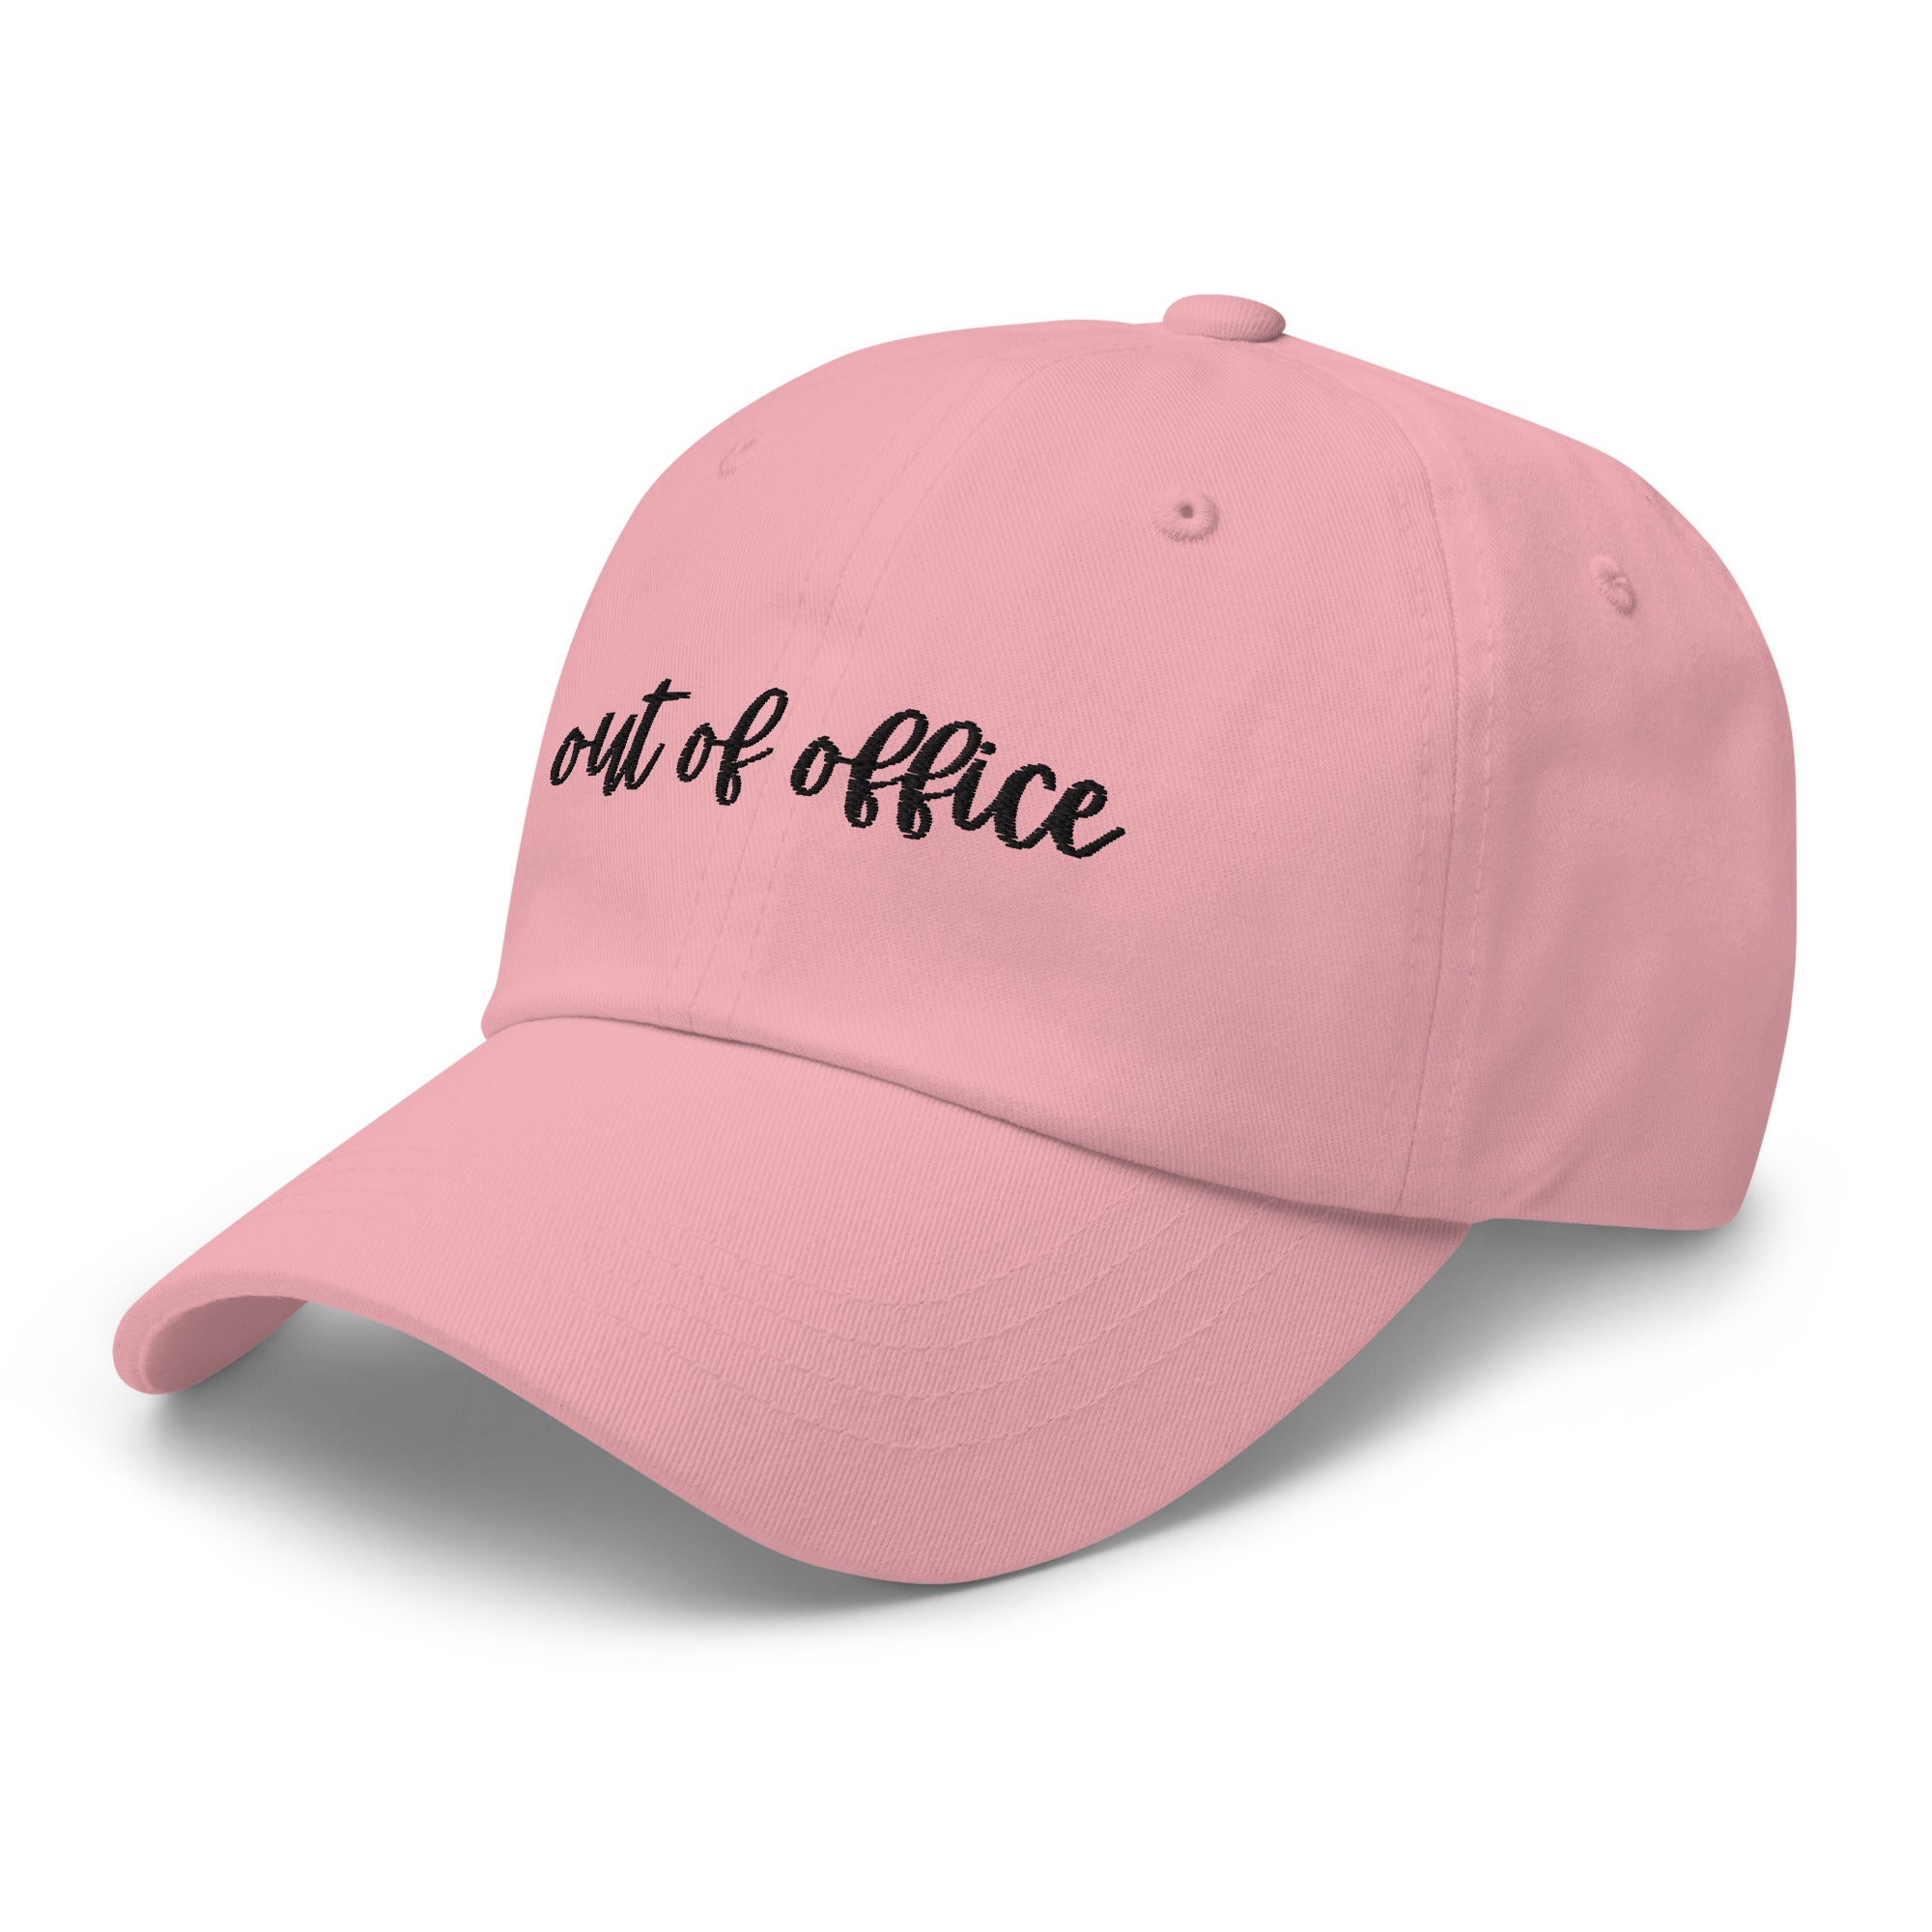 Out of Office Embroidered Dad Hat - The Kindness Cause